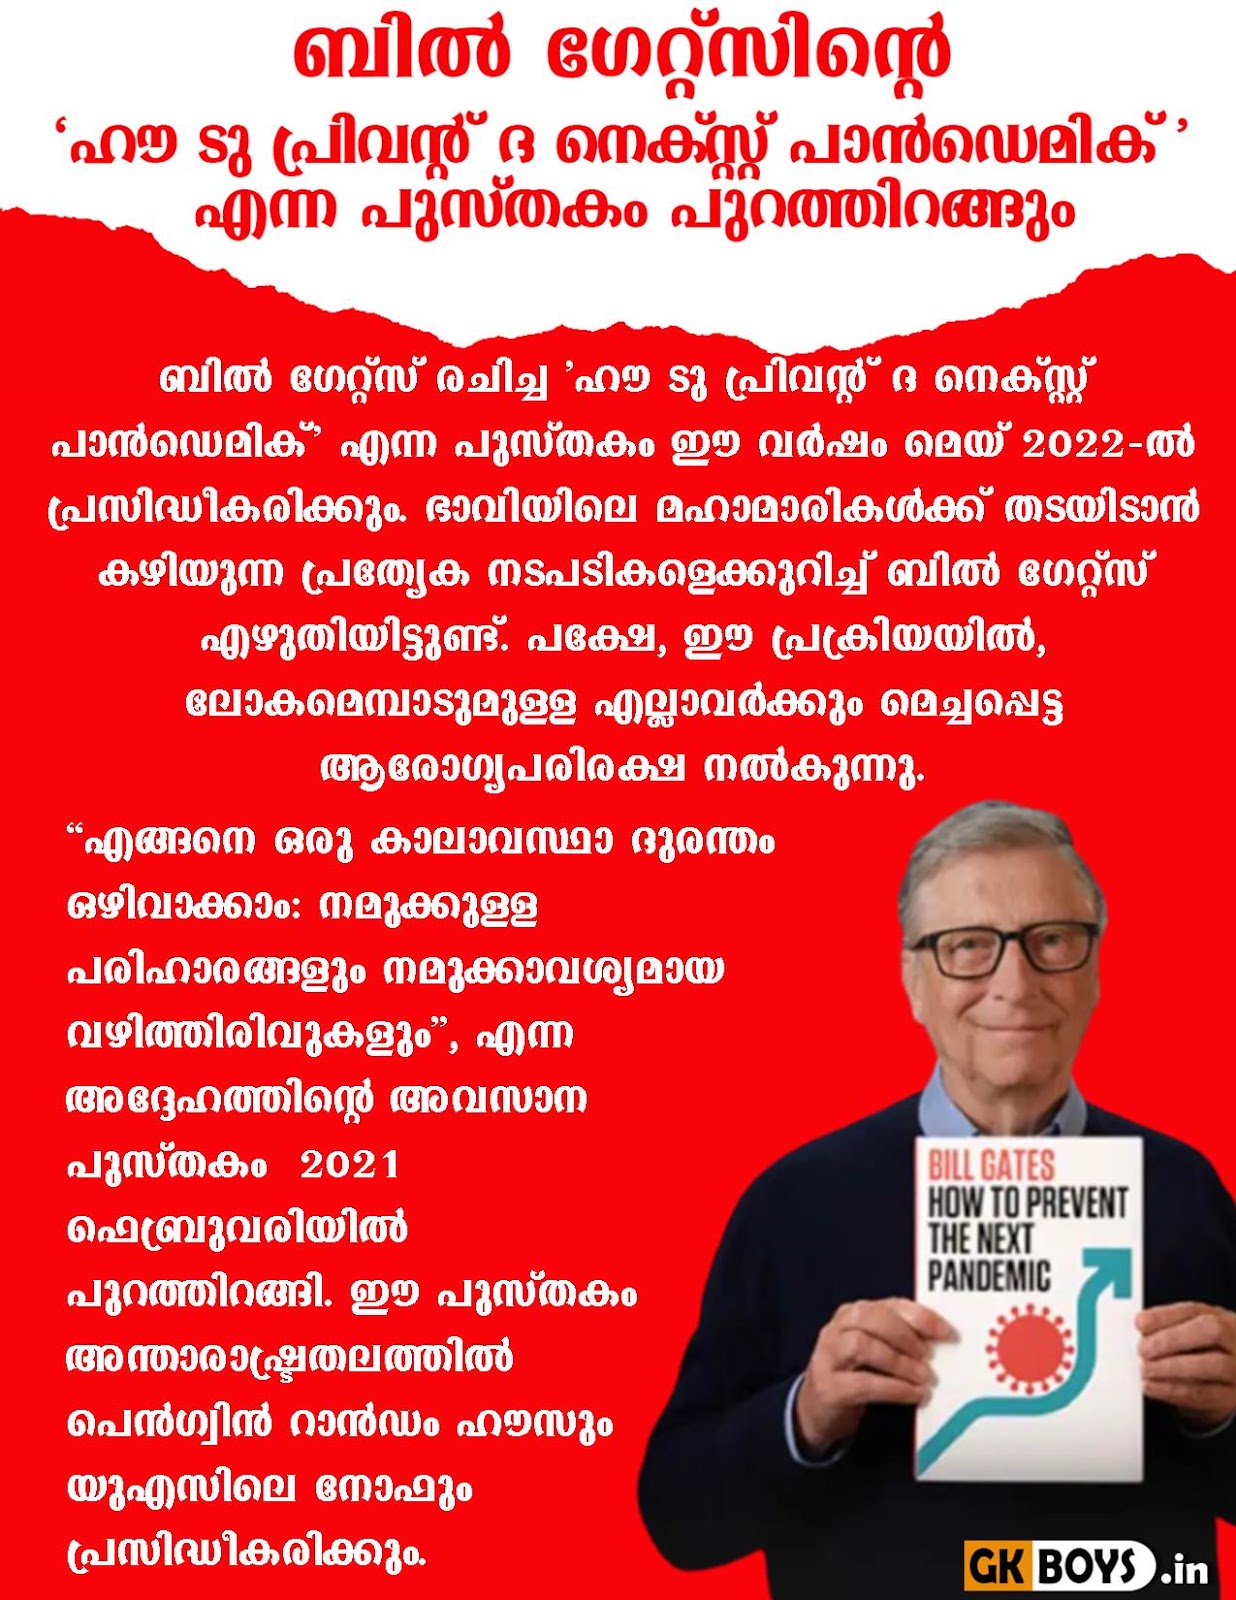 A book titled ‘How to Prevent the Next Pandemic’ by Bill Gates